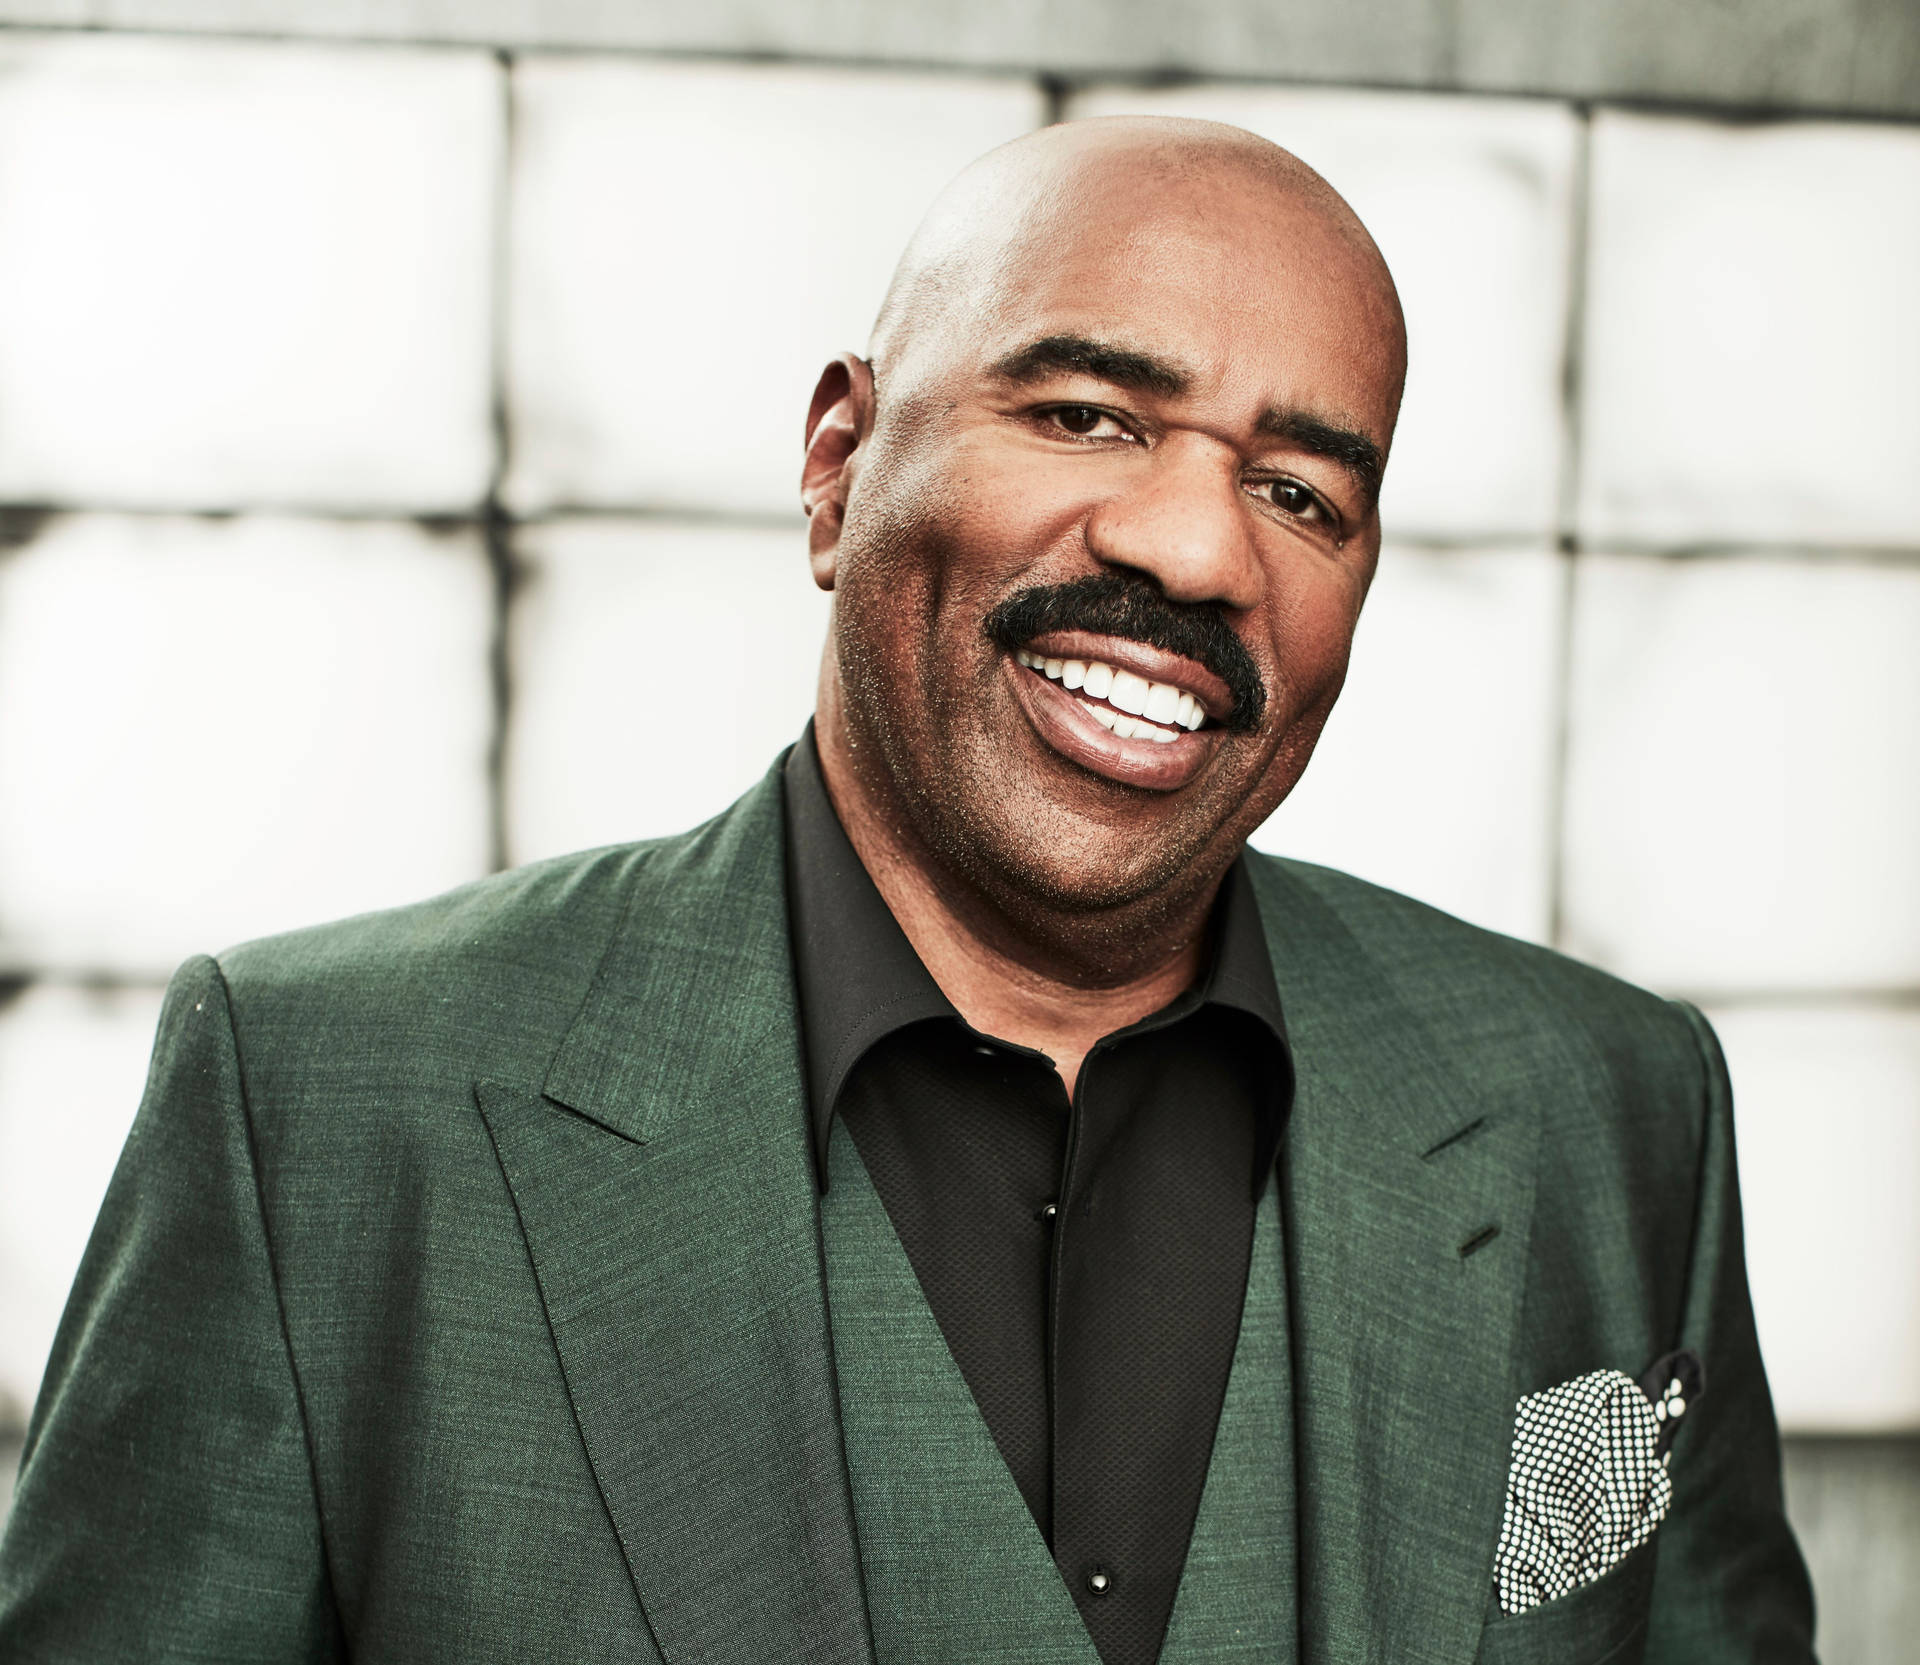 Steve Harvey With Black And Green Suit